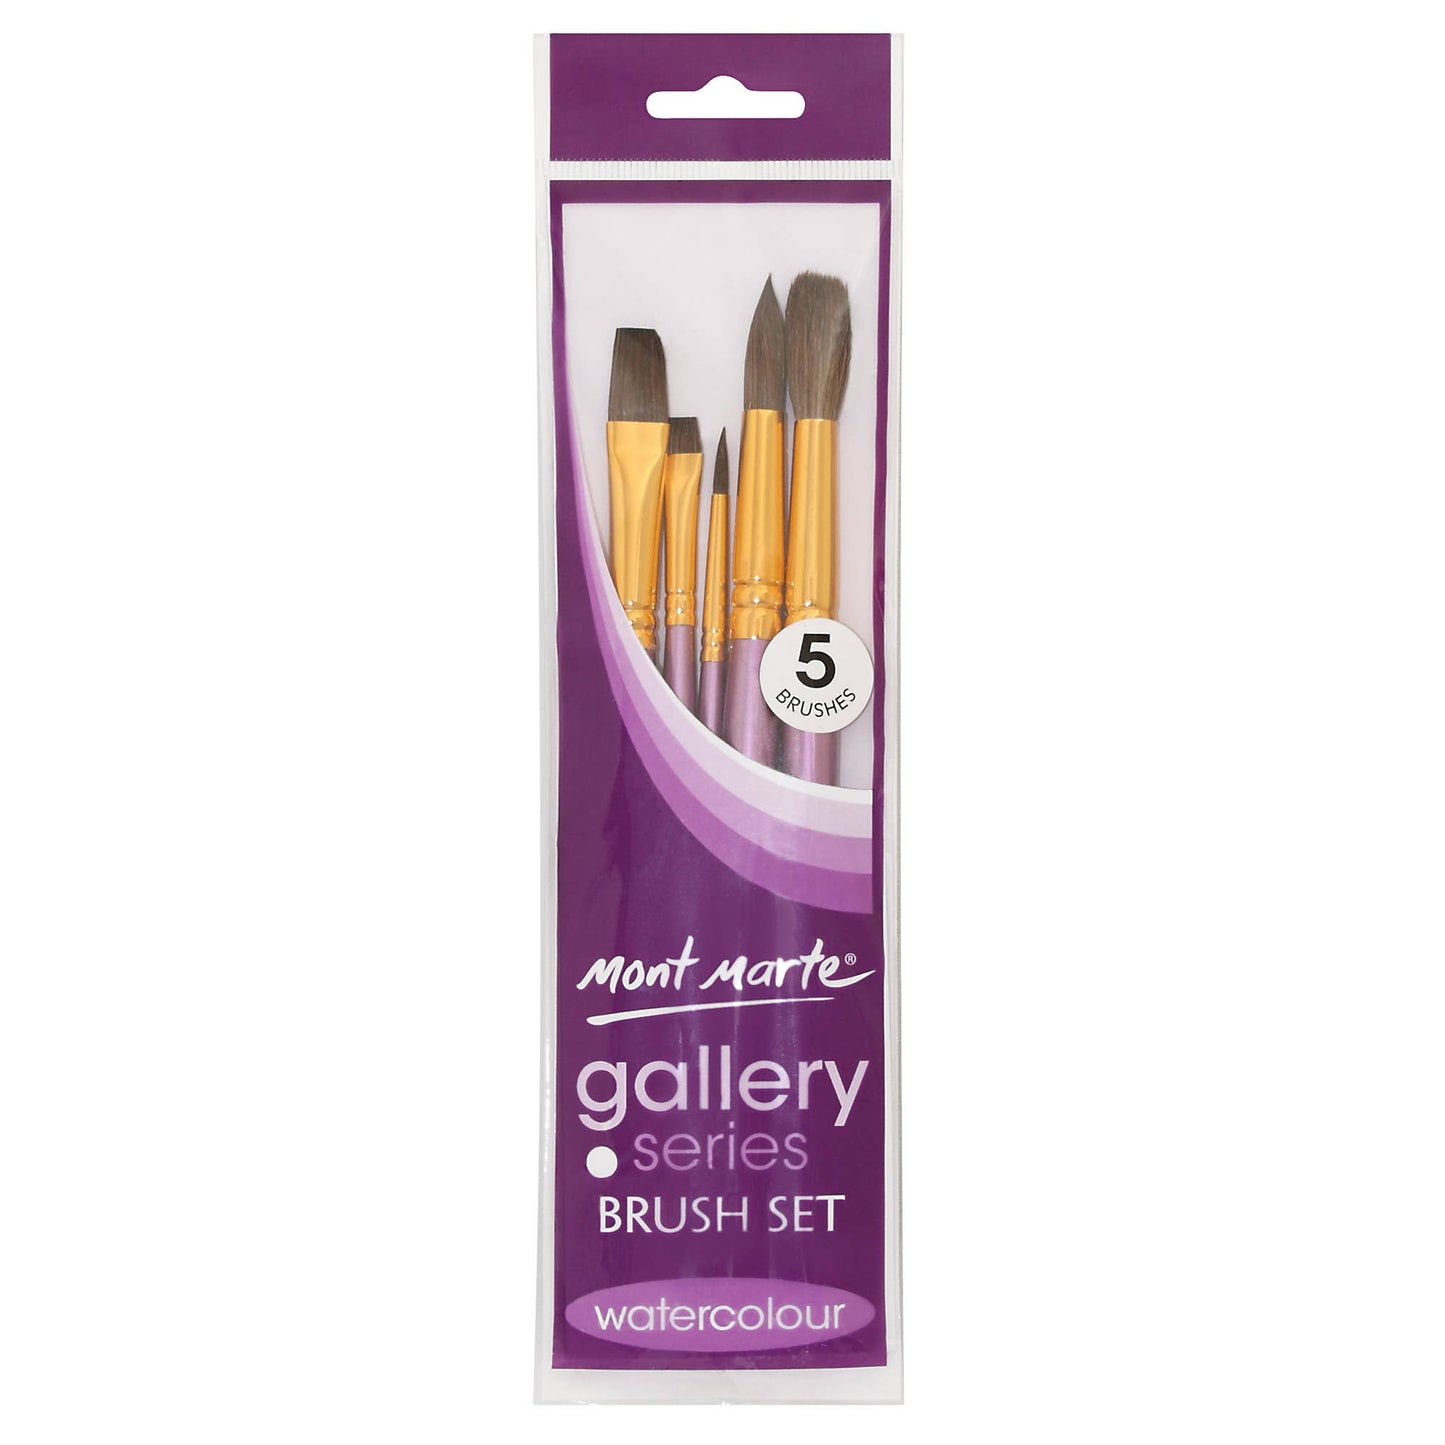 NEW // 5pc Watercolor Brush Set – Mont Marte Gallery Series